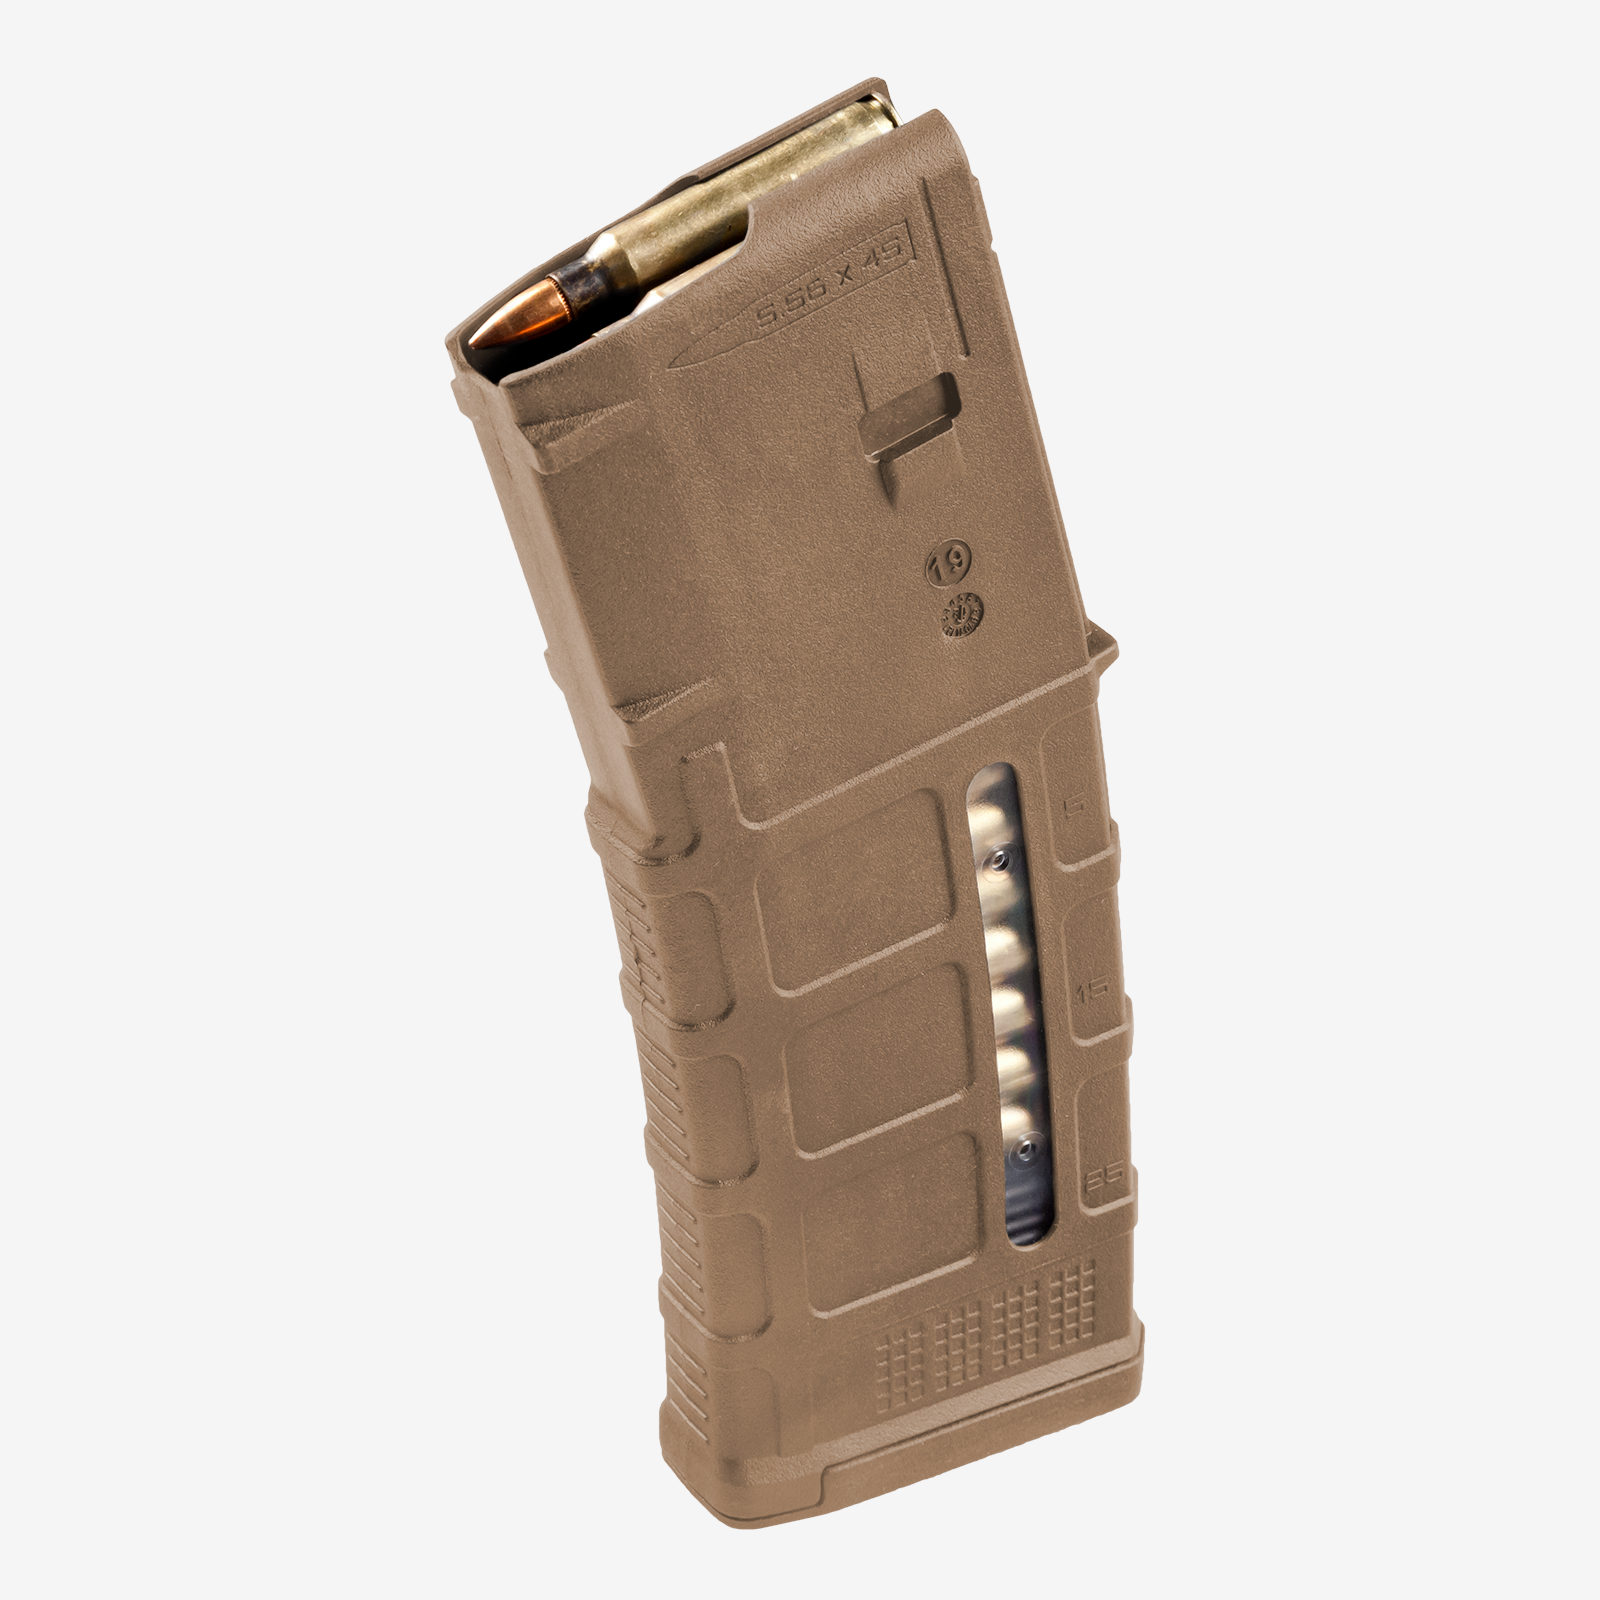 The Magpul 30RD AR15 Tan Windowed GEN3 PMAG rifle magazine holds 30 5.56x45mm NATO or .223 Remington cartridges for use with AR-15 and M4 rifles.